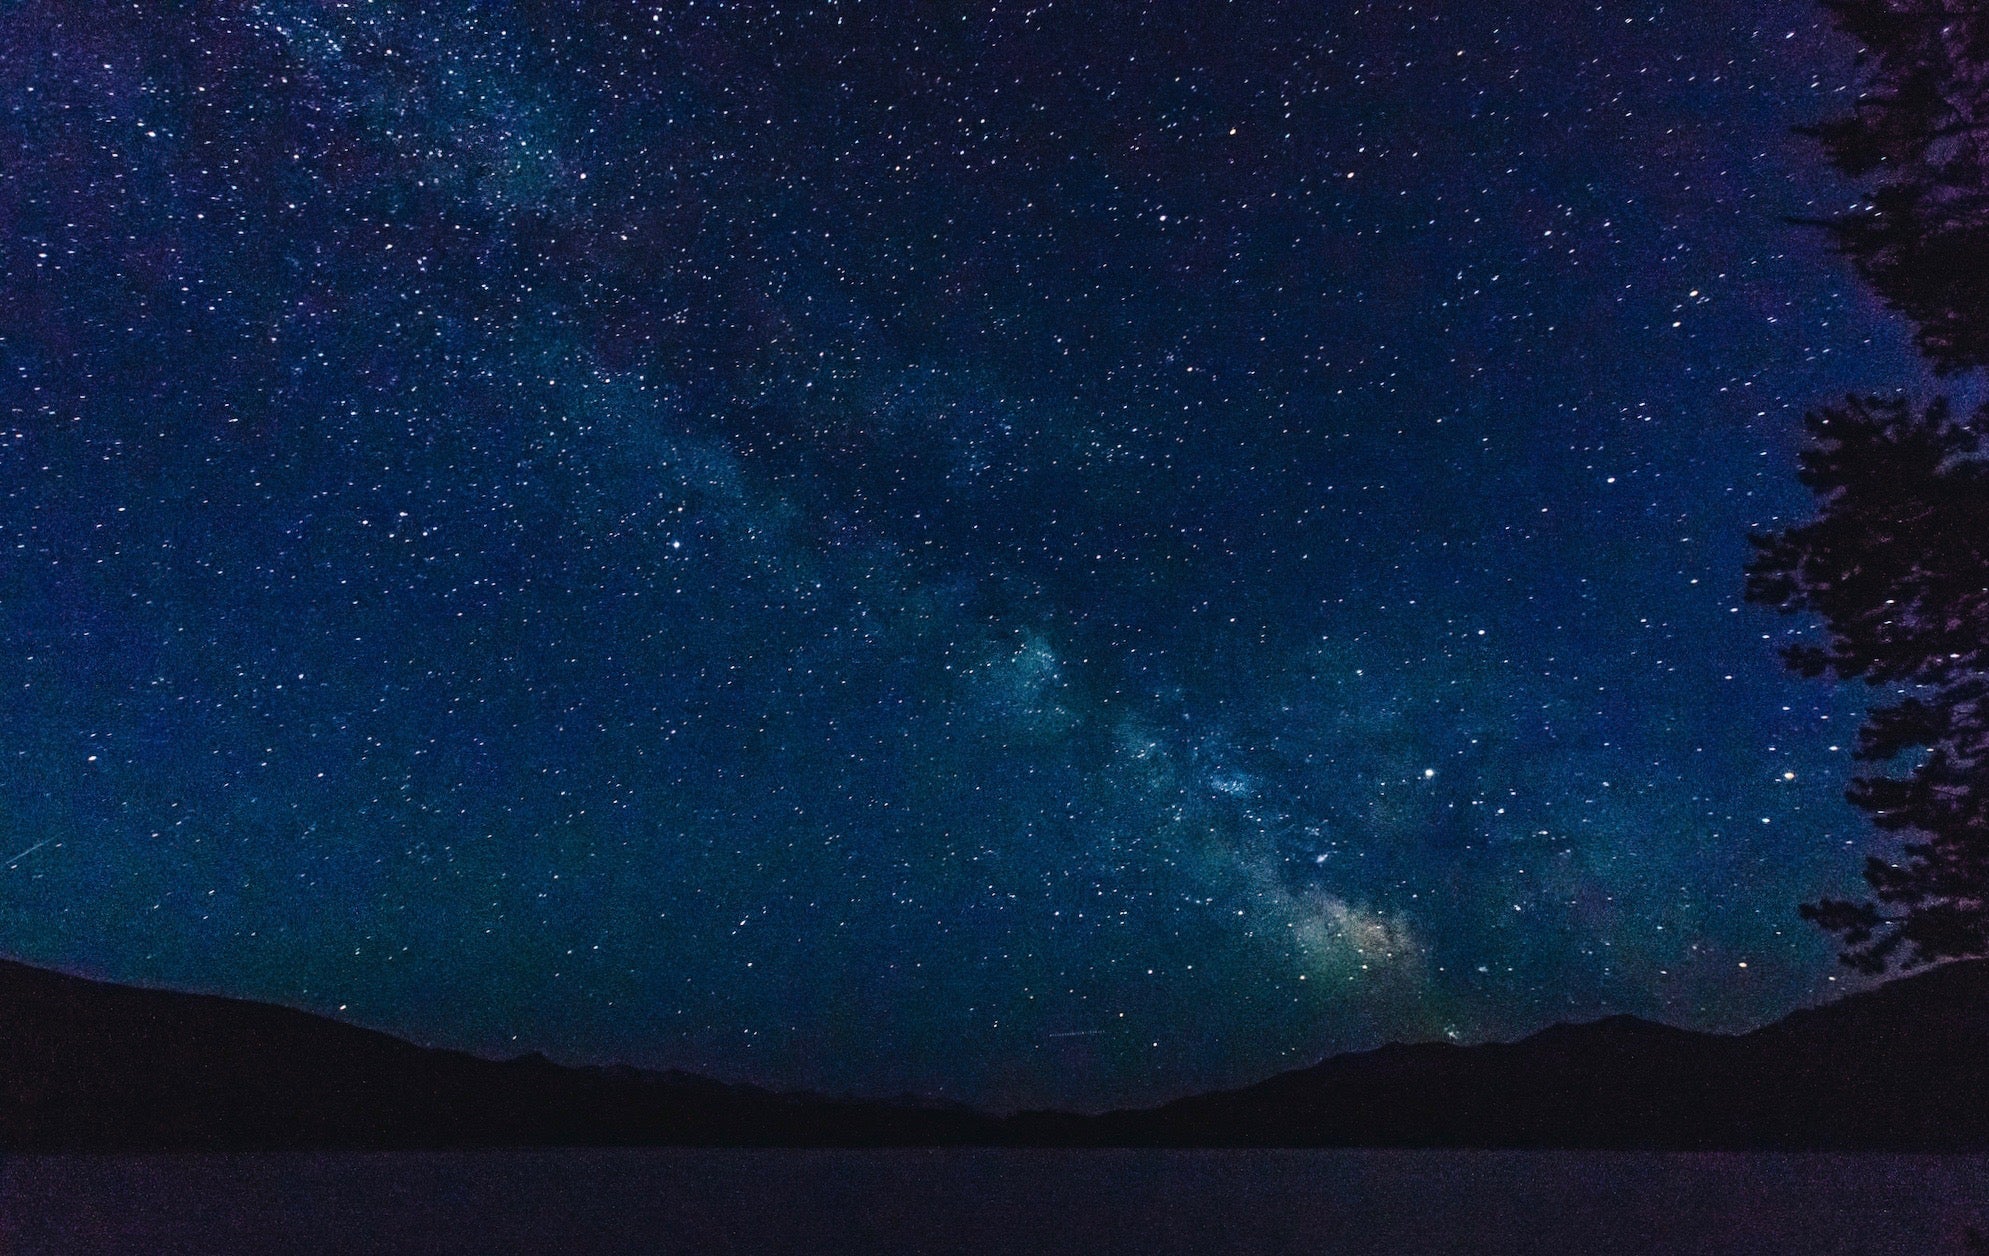 Milky Way rising over the lake